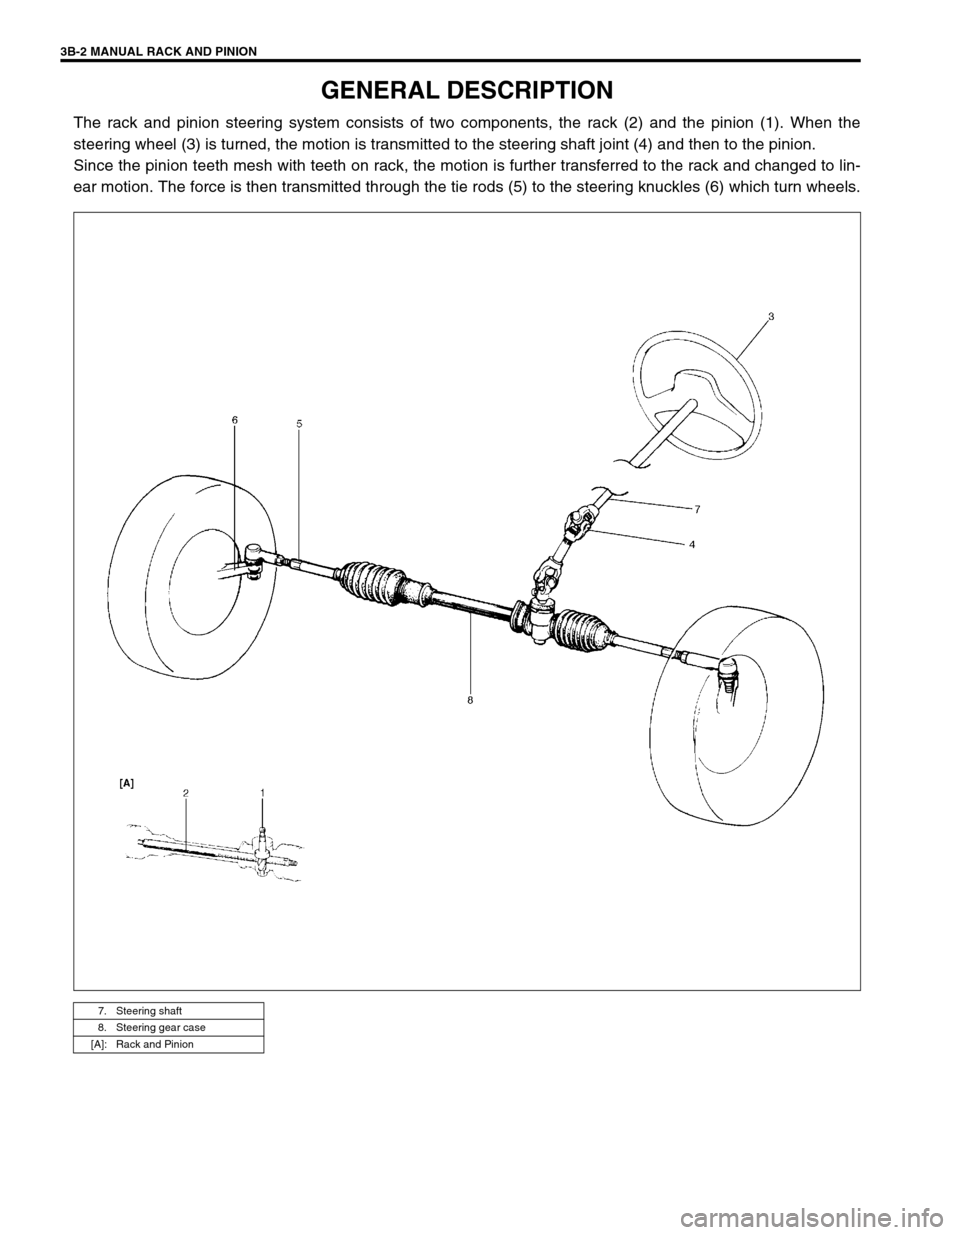 SUZUKI SWIFT 2000 1.G RG413 Service Workshop Manual 3B-2 MANUAL RACK AND PINION
GENERAL DESCRIPTION
The rack and pinion steering system consists of two components, the rack (2) and the pinion (1). When the
steering wheel (3) is turned, the motion is tr